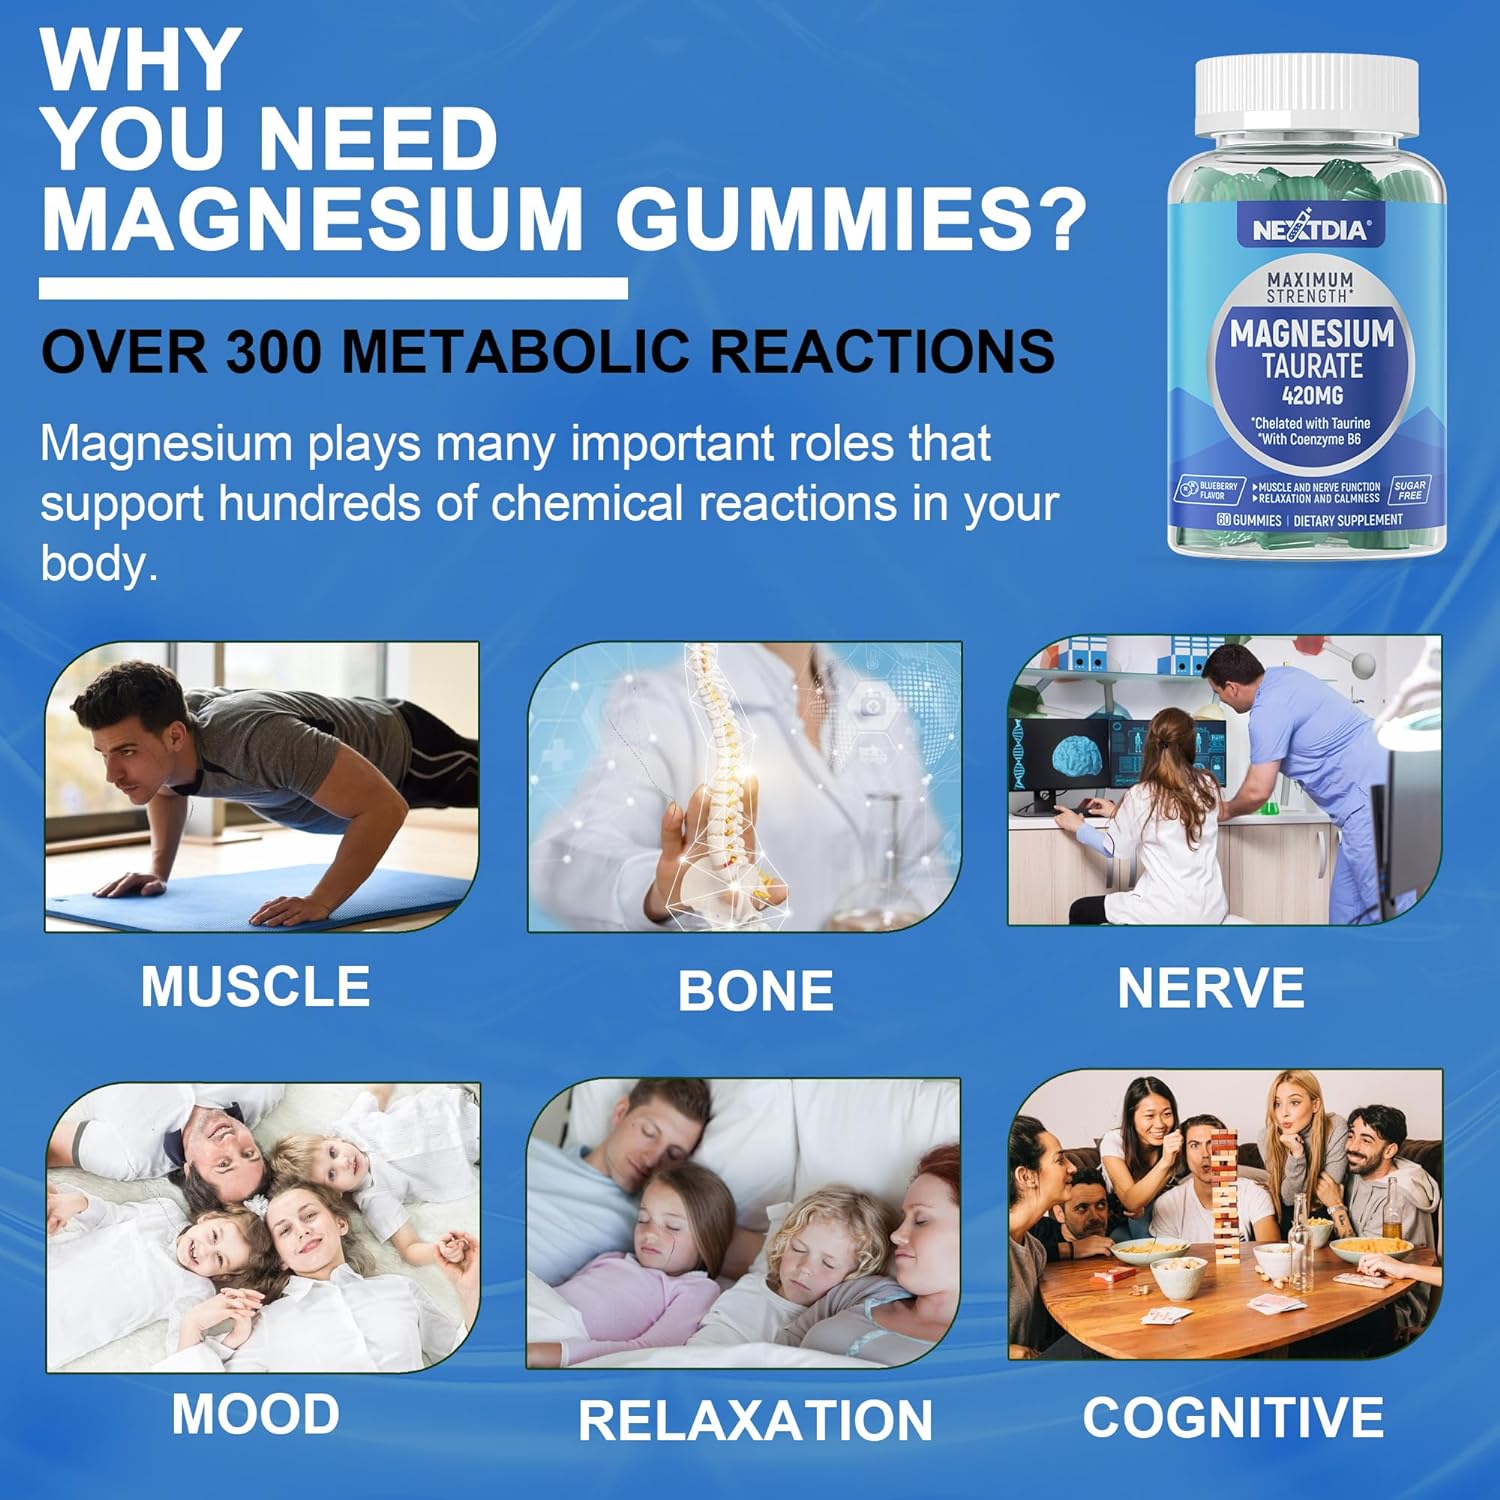 Magnesium Gummies, Magnesium Taurate 420mg w/Vitamin B6, Sugar Free Chelated Magnesium Supplement for Bone, Nerve and Mood Support, Promotes Calmness, Muscles Recover & Relieves Cramps, Vegan, 120 Cts : Health & Household